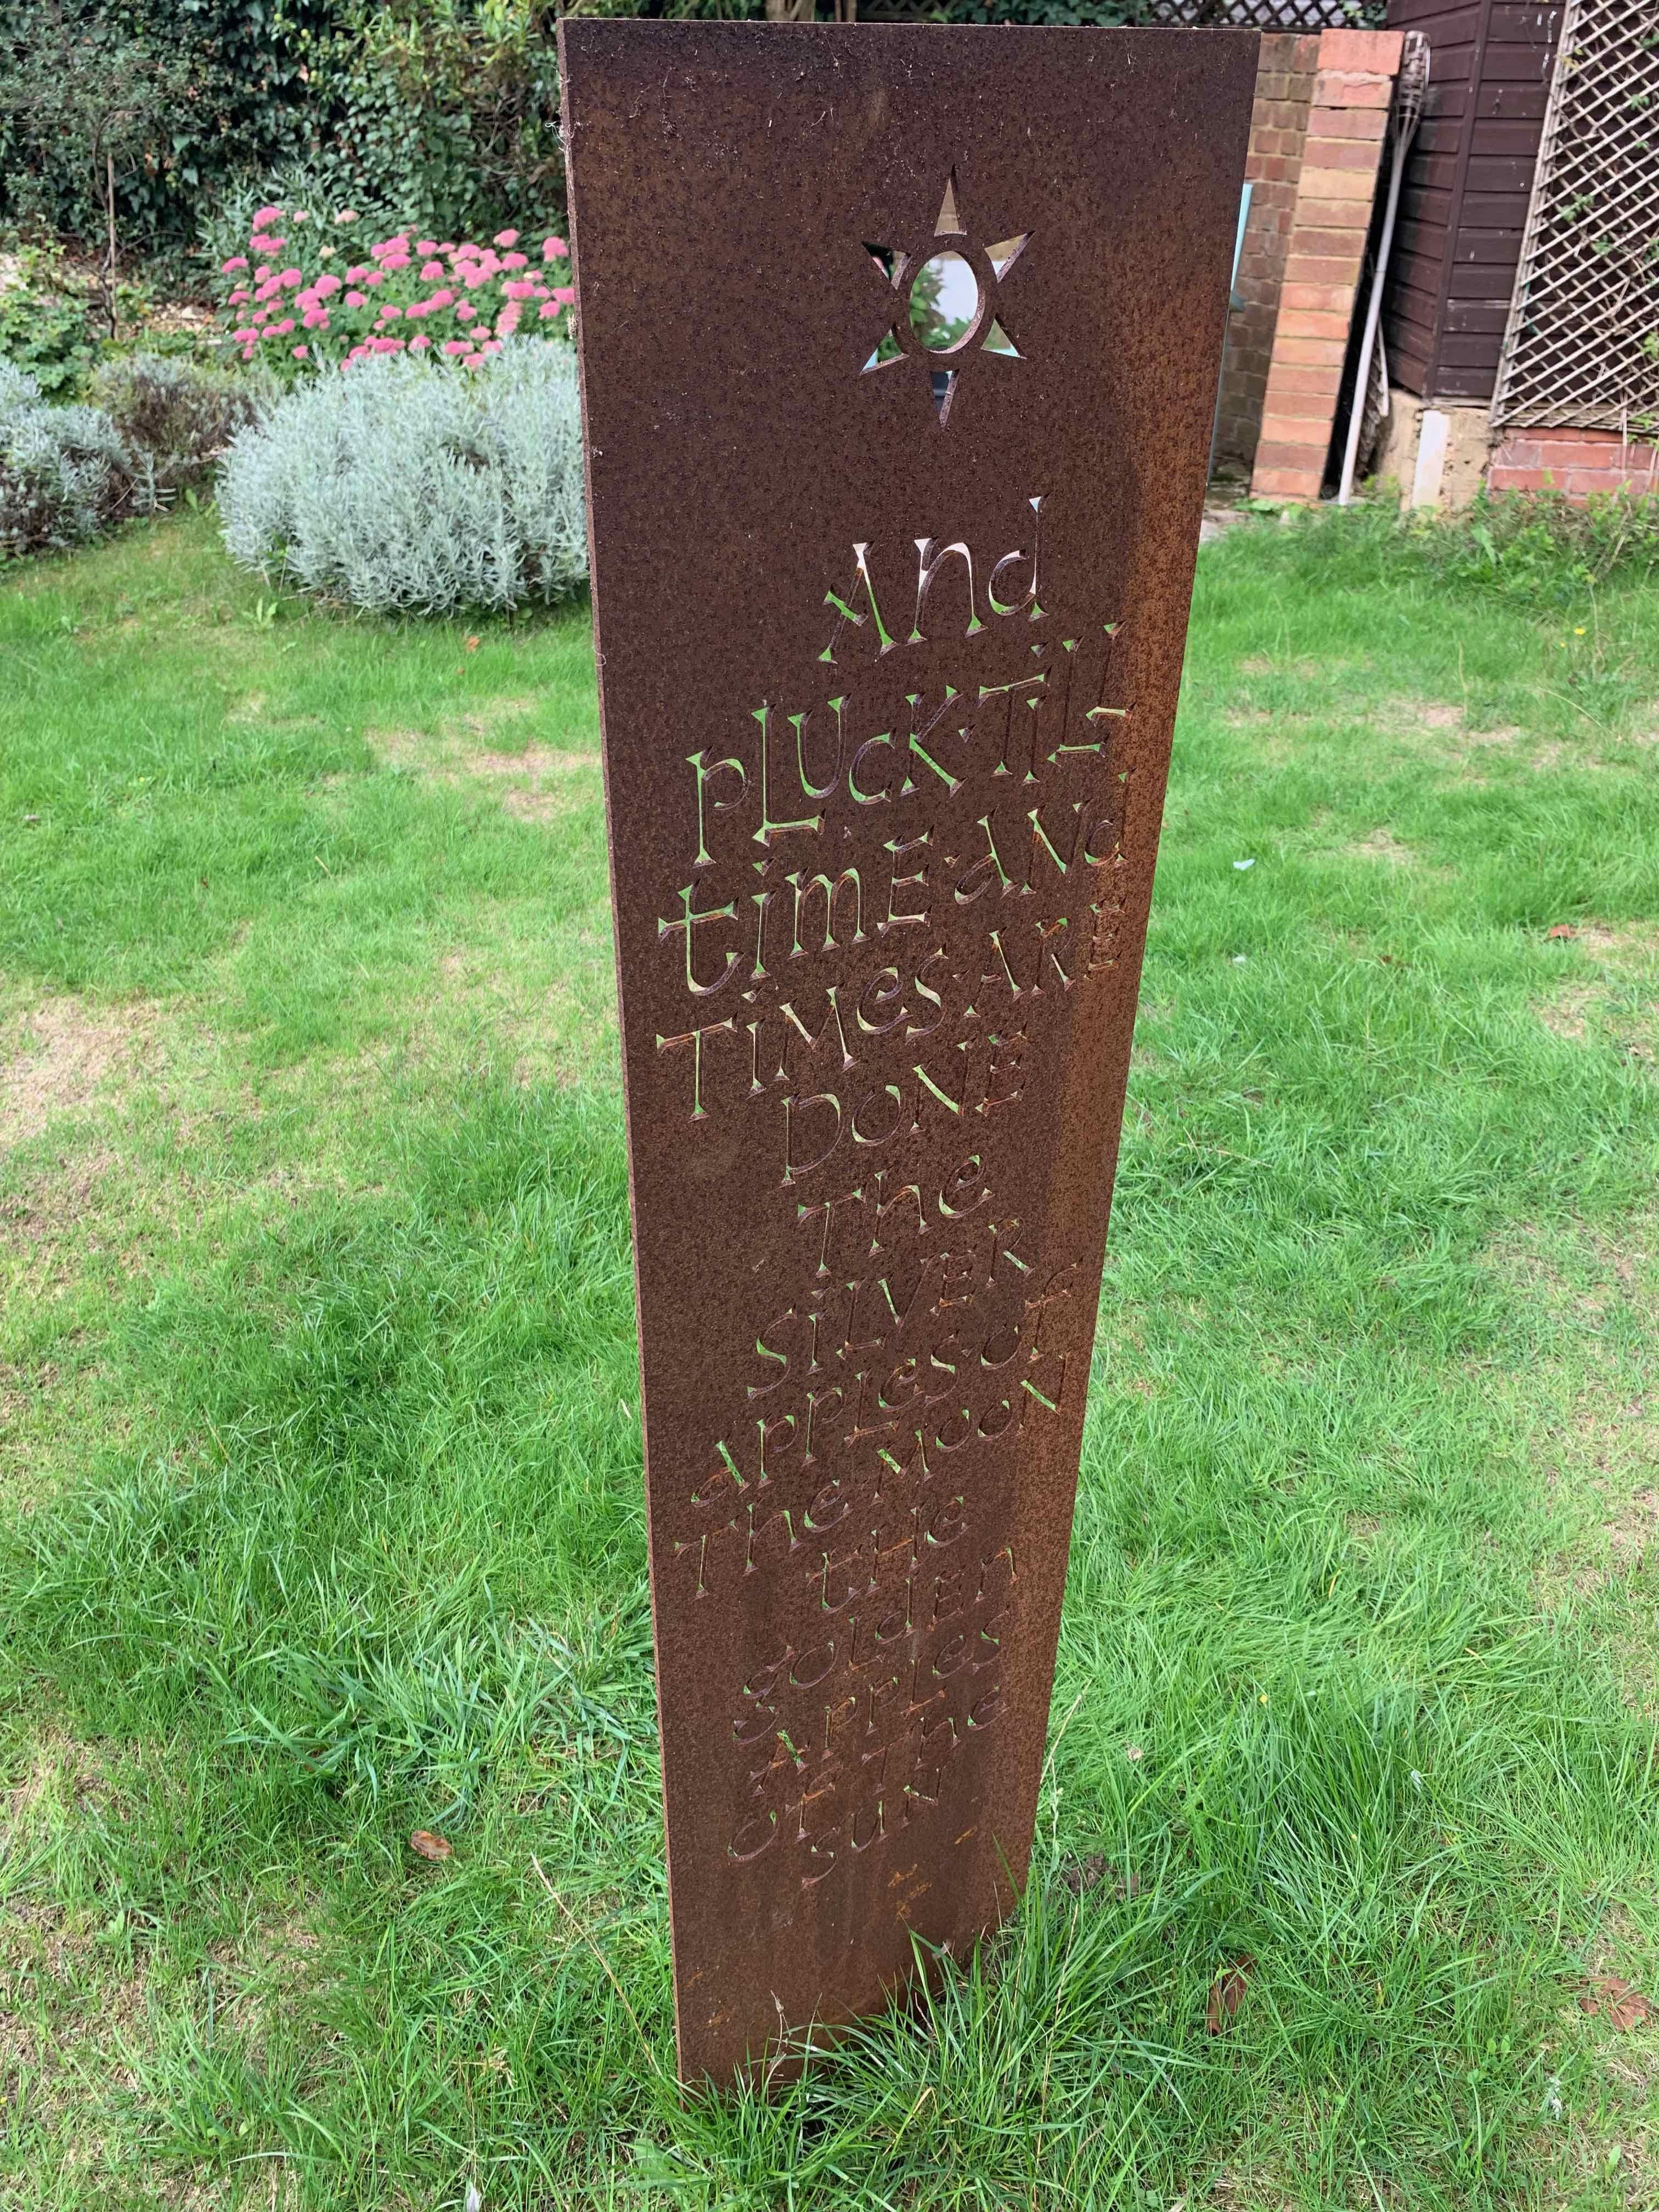 This is an editioned sculpture by one of the world’s most creative Letterwork Sculptors and will look magnificent in a lawn or bed.  The lettering has been designed by Annet Stirling and cut out of the Corten Steel by laser.  The sculpture is very